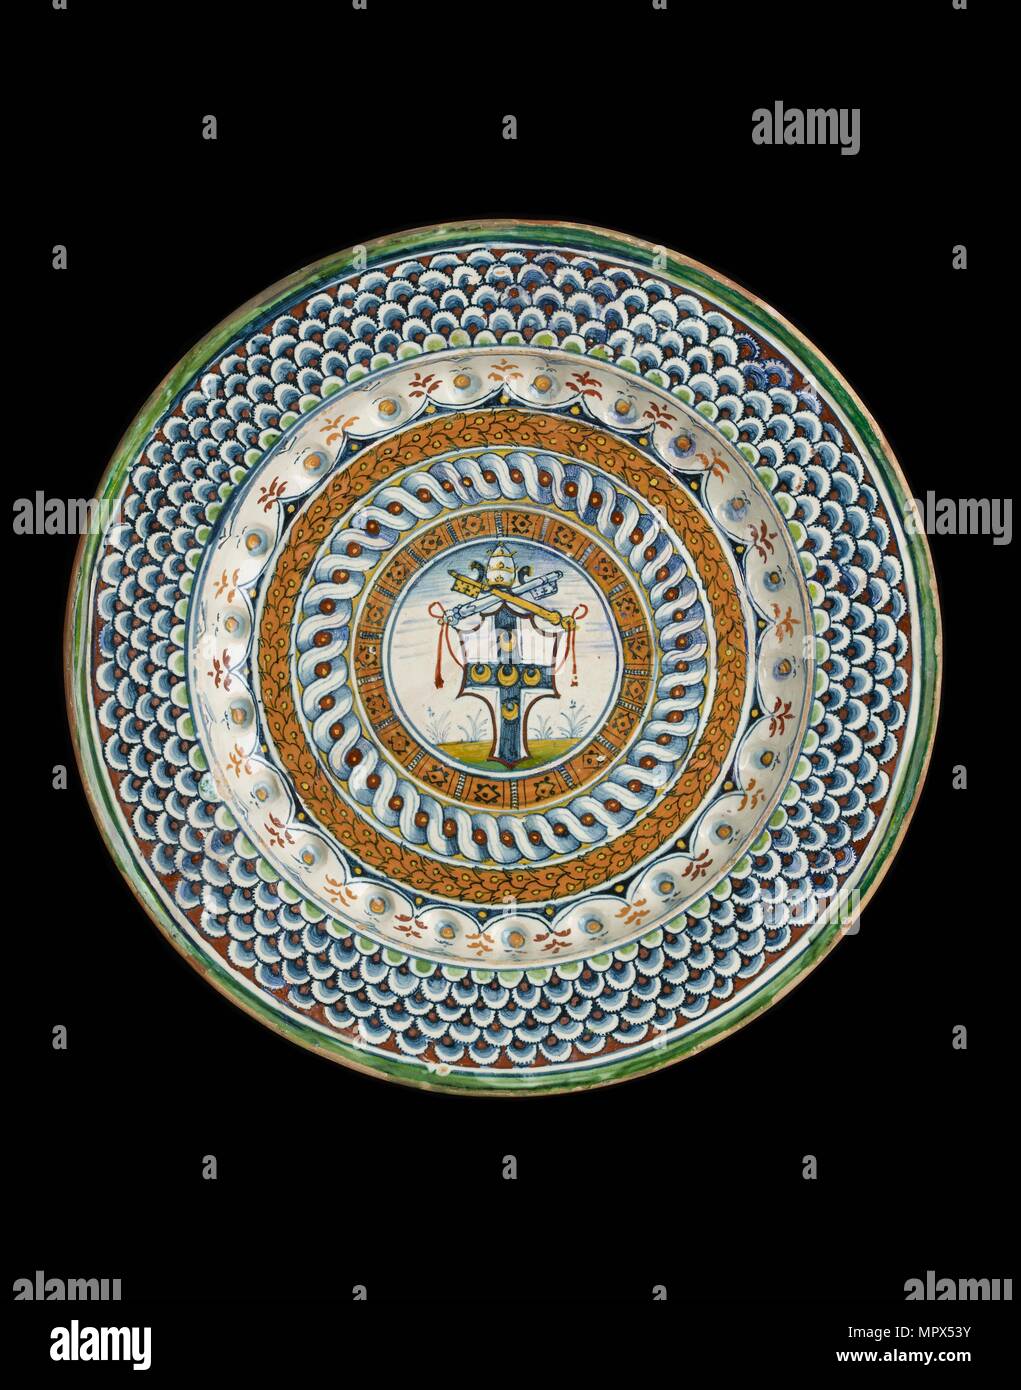 Plate with arms of Pope Pius III (Francesco Todeschere Piccolomini), 1503. Artist: Unknown. Stock Photo